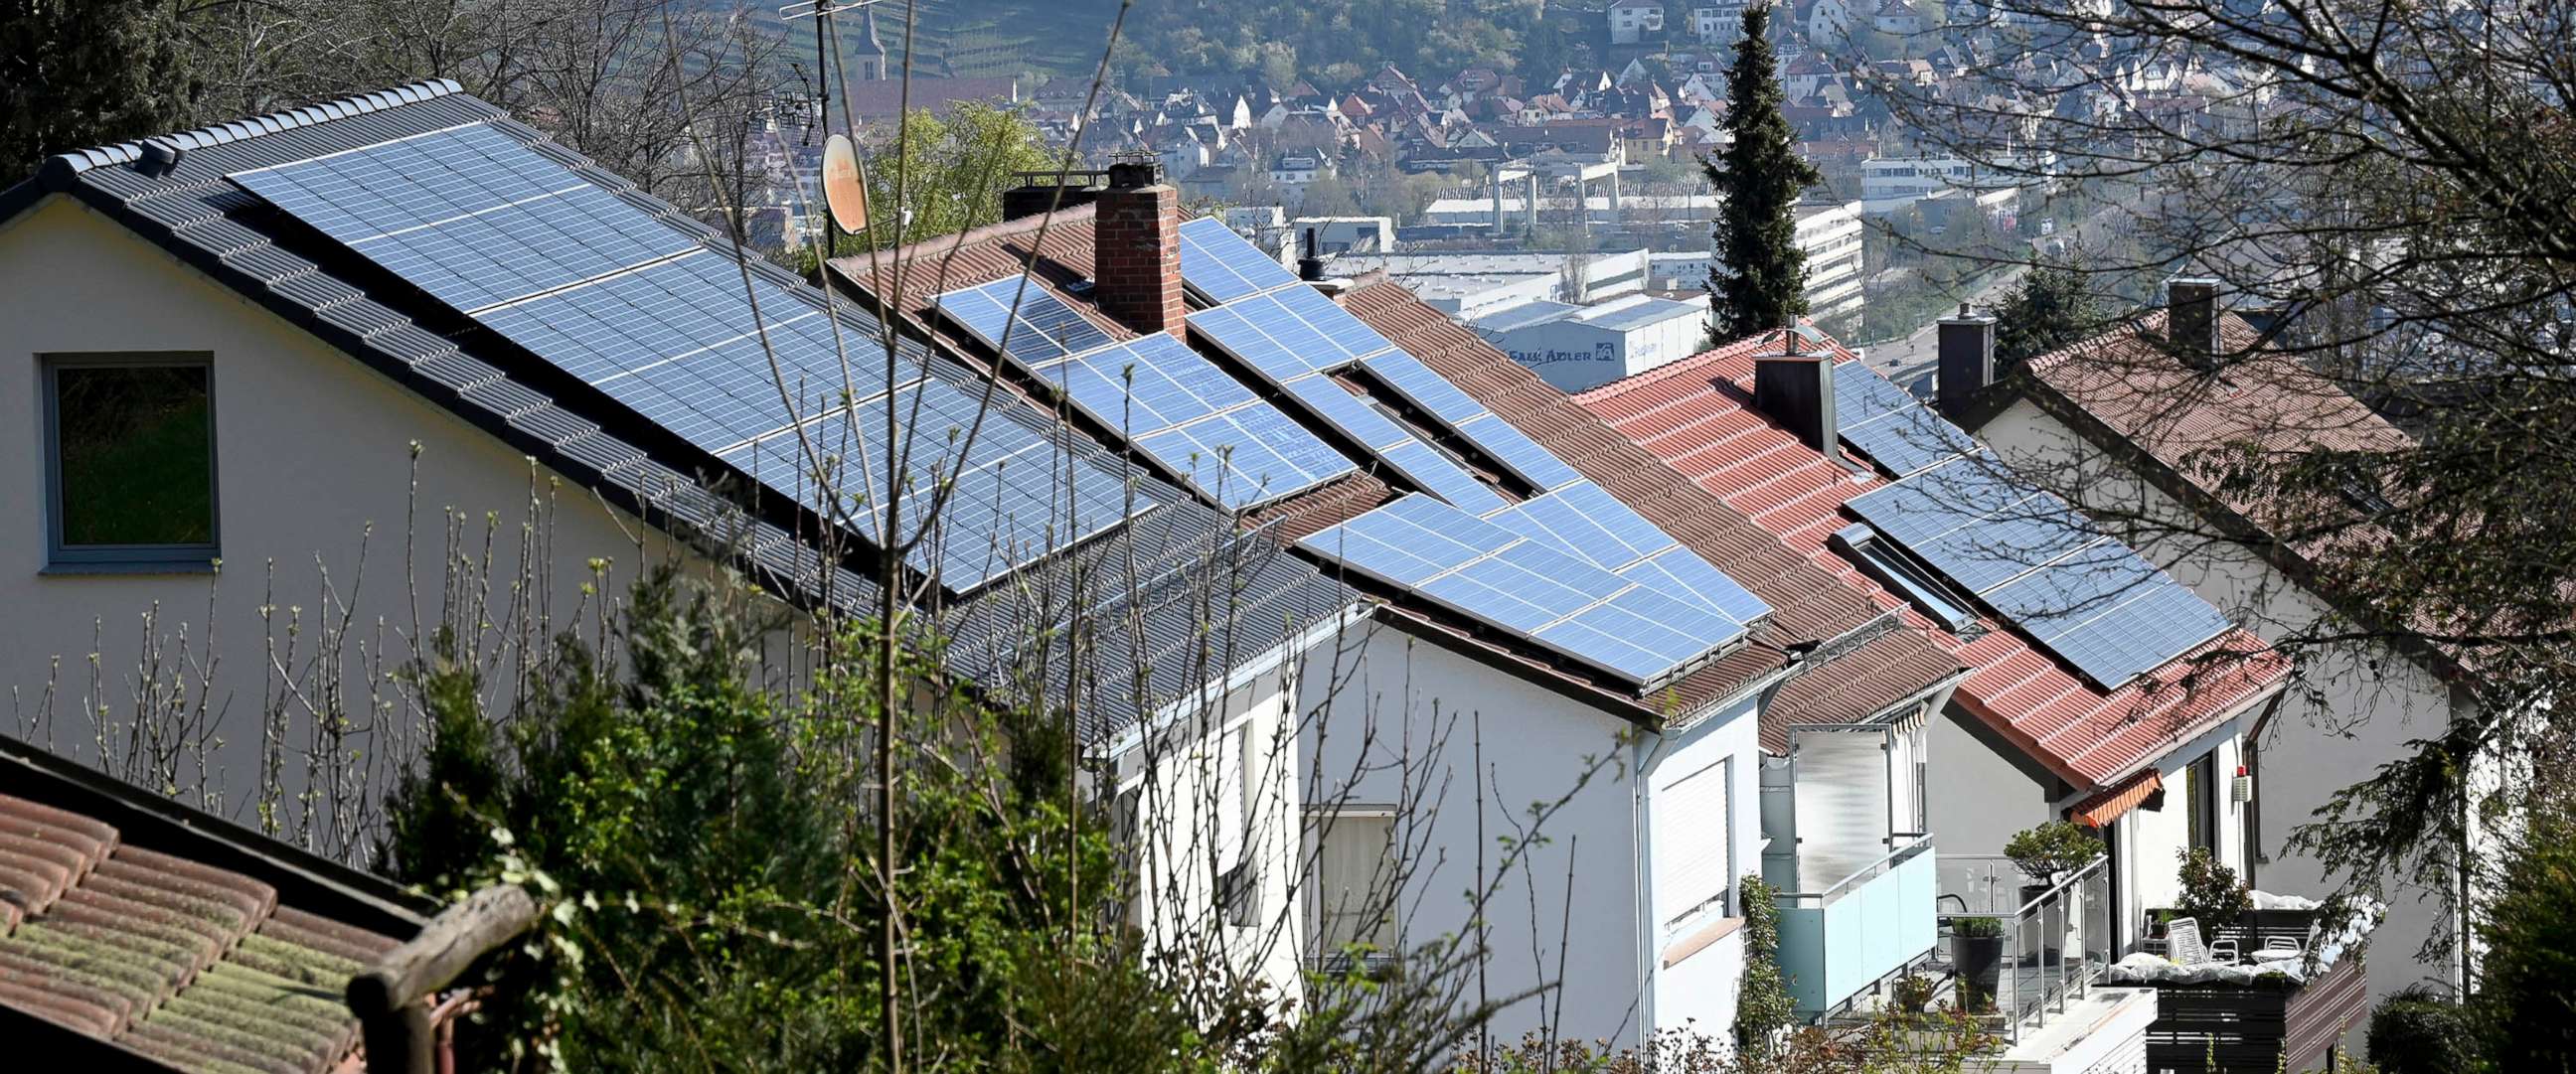 PHOTO: Solar panels are installed on the roofs of houses in Stuttgart, Germany, April 14, 2021.